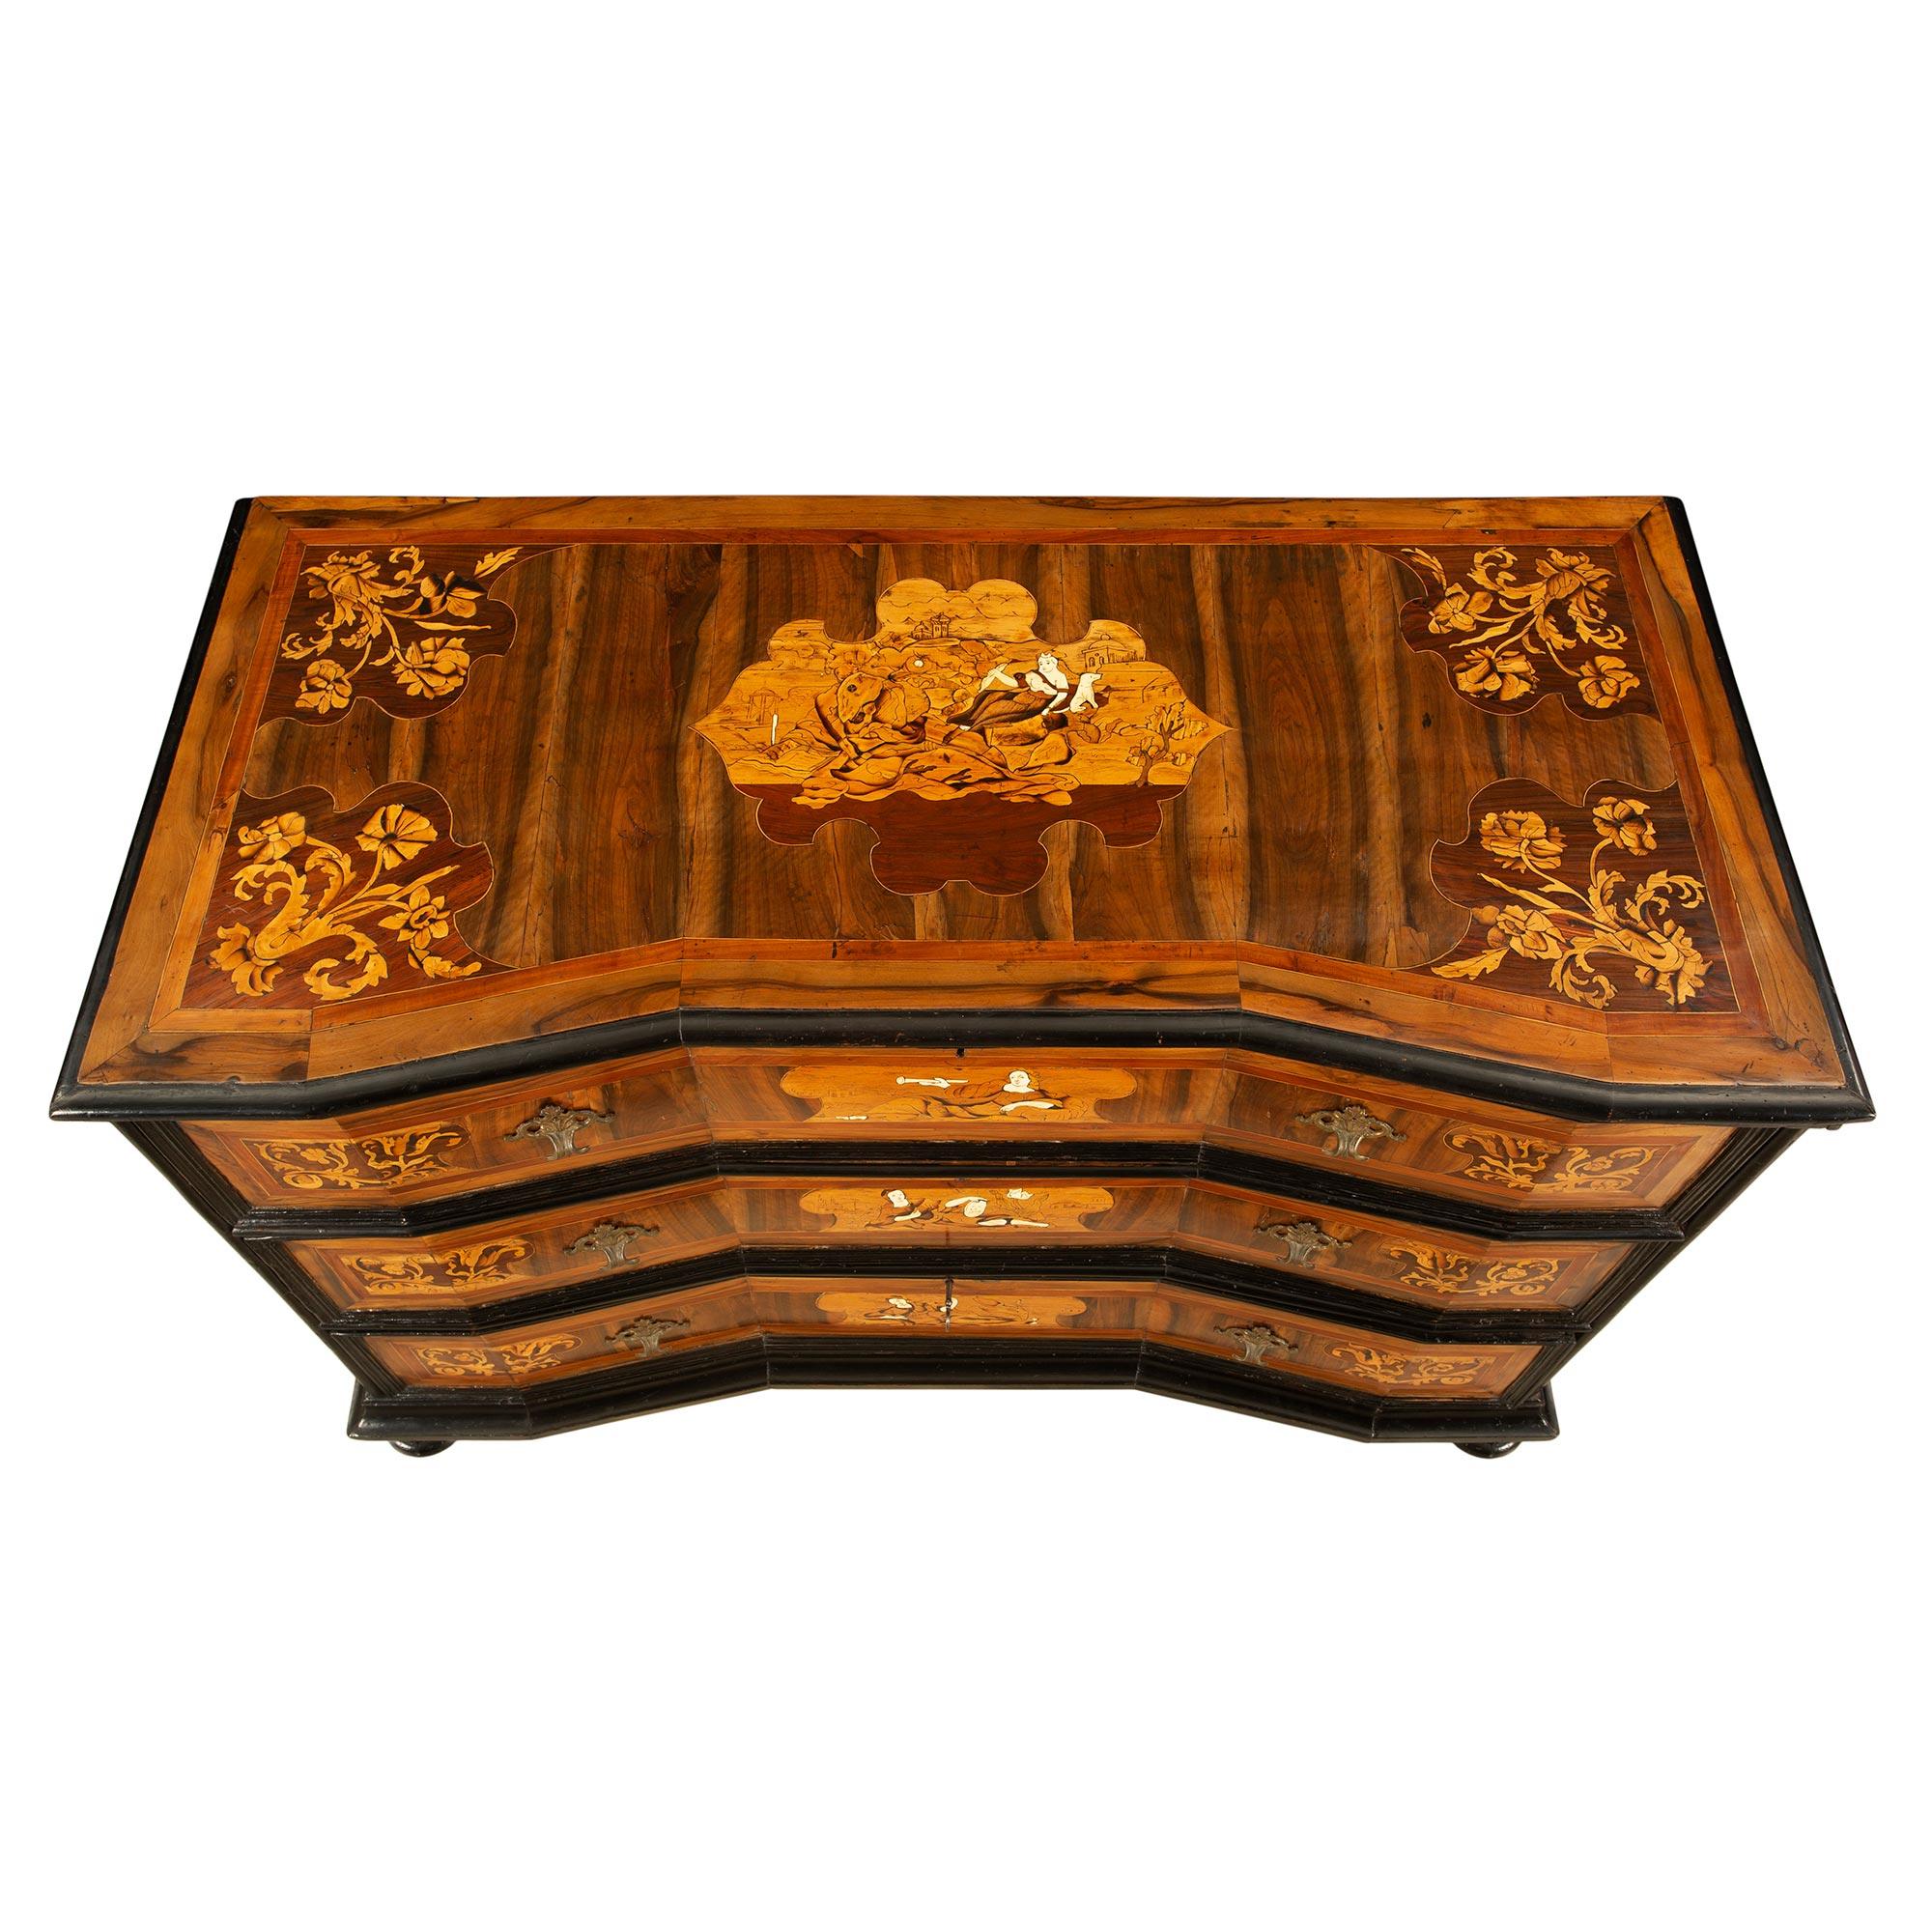 An exceptional Italian early 18th century ebonized fruitwood and walnut inlaid commode from the Lombardi region. This stunning commode is raised on a topie feet below the mottled edge frieze. Above are three very impressive cut angle drawers with